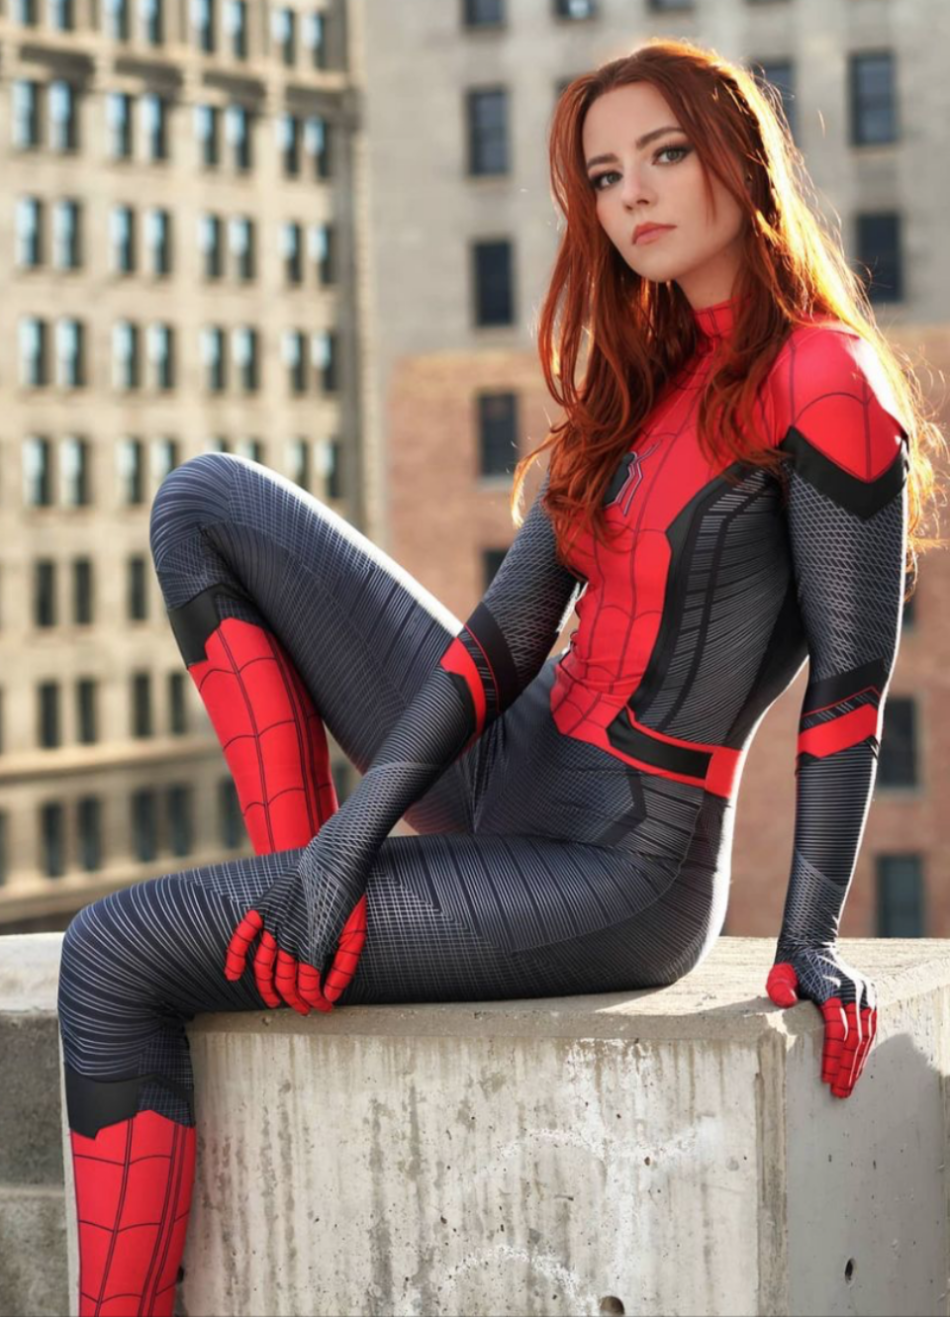 Sexy Red Hot Cosplay Girls Spiderman Women Best Photo Compilation 2021 (89 HQ Photos) 131